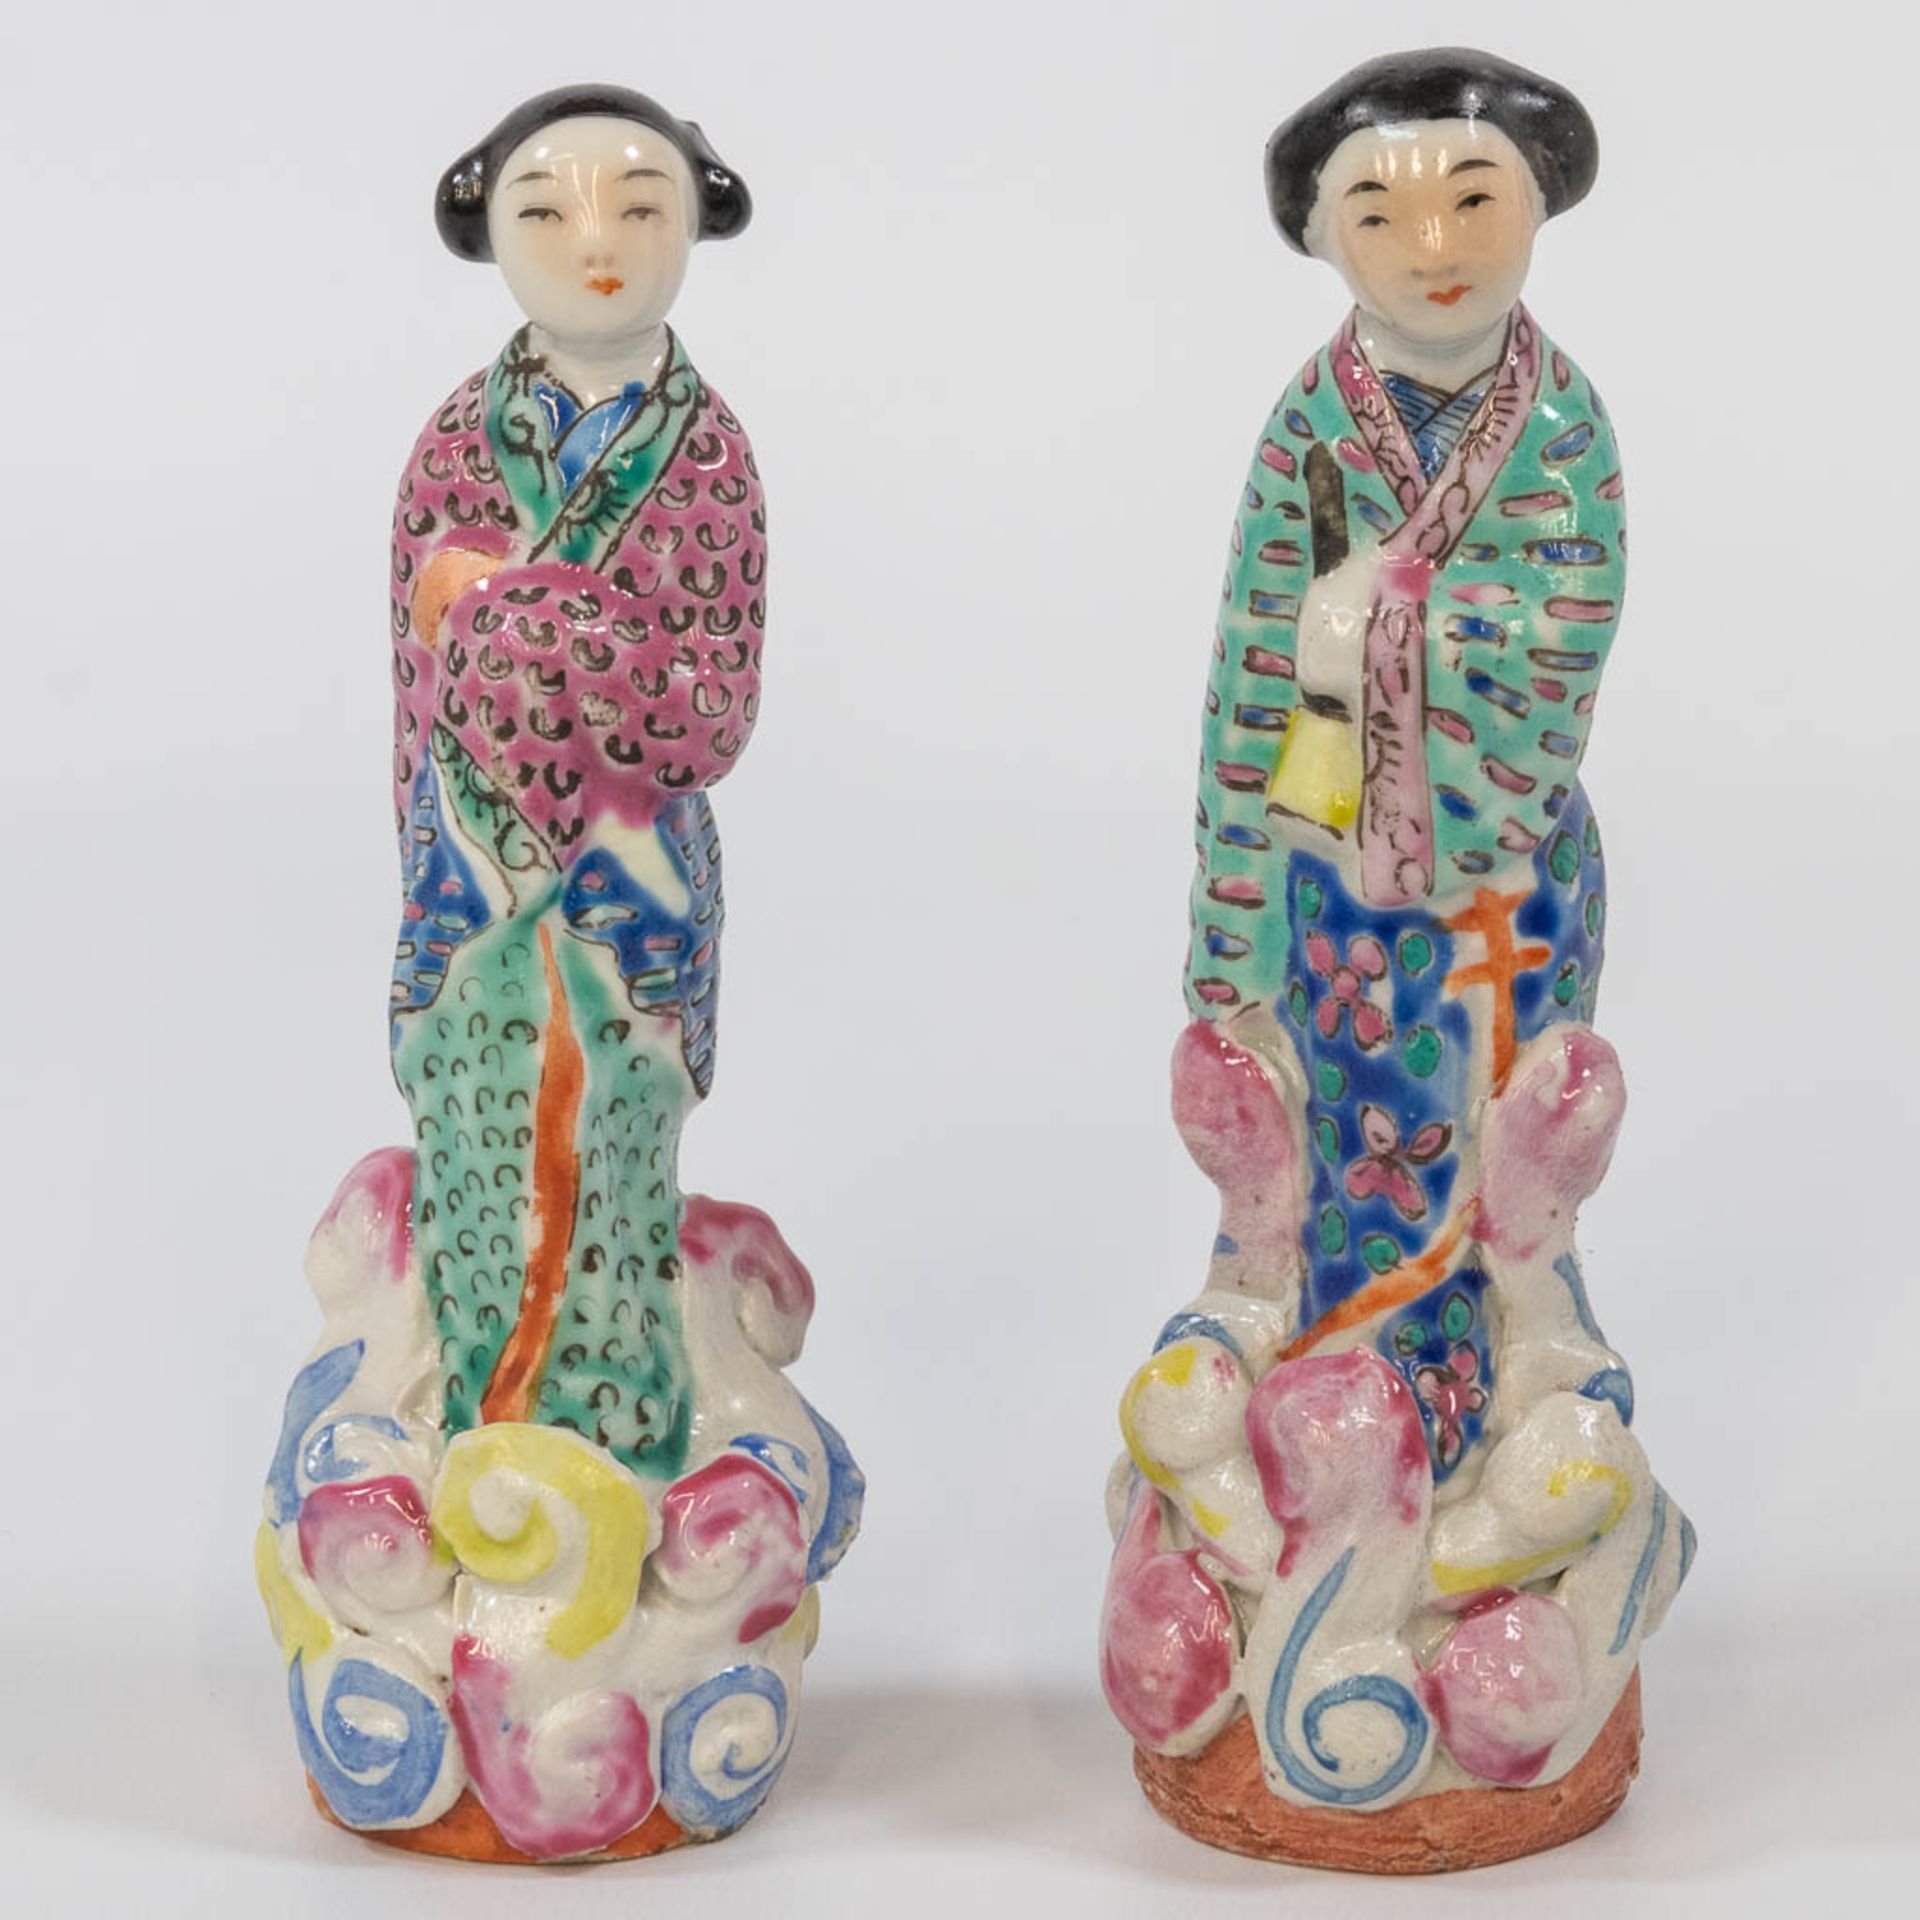 A collection of 13 Chinese and Japanese statues made of porcelain and ceramics. (10 x 11 x 25 cm) - Bild 10 aus 17